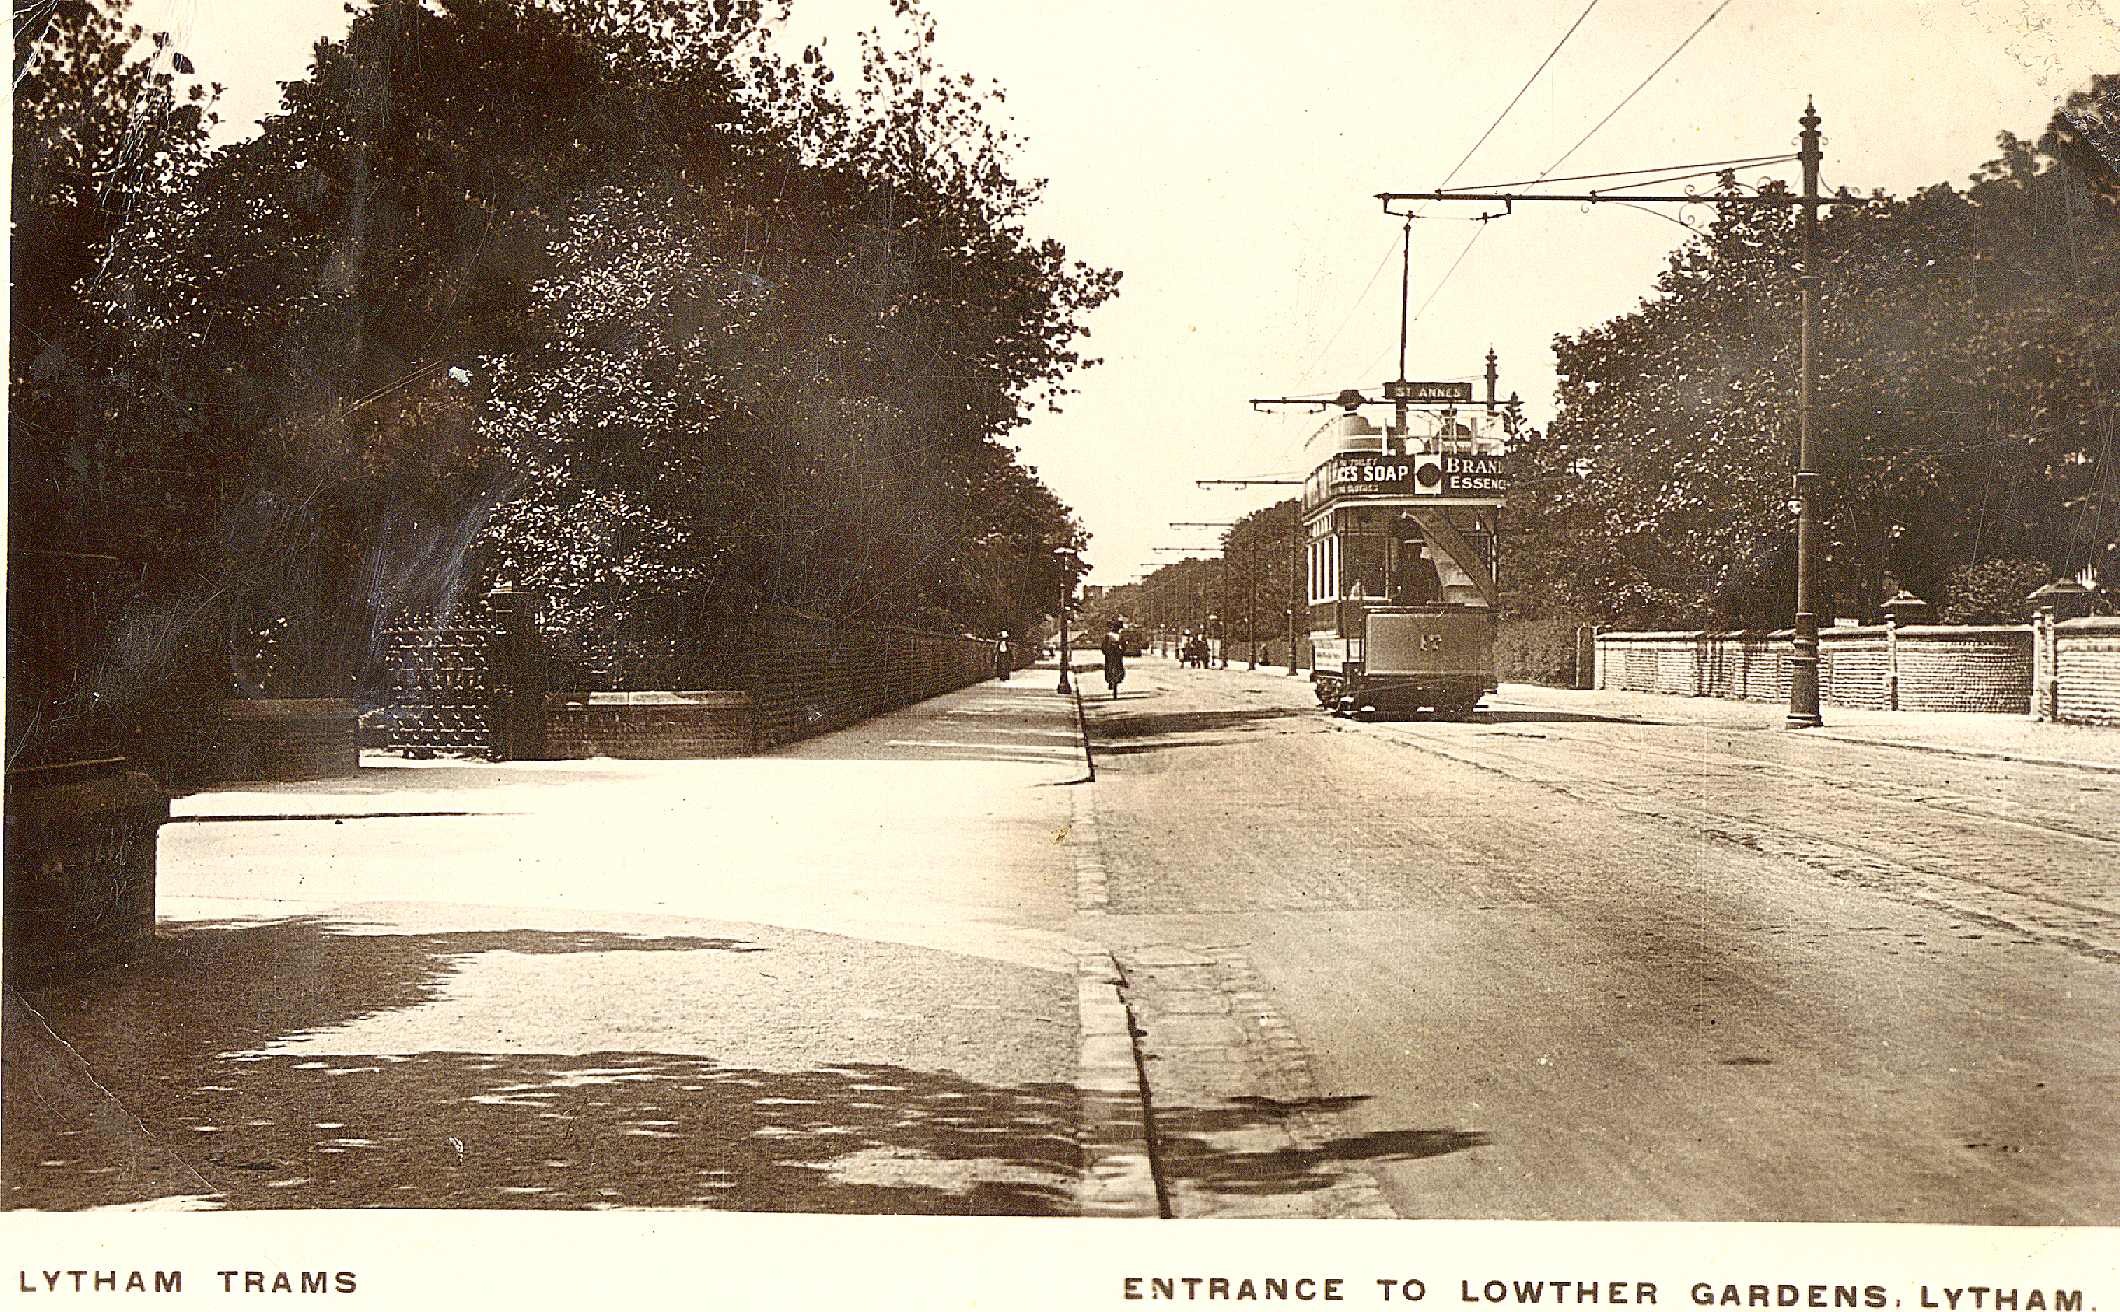 Lowther gardens entrance with tram